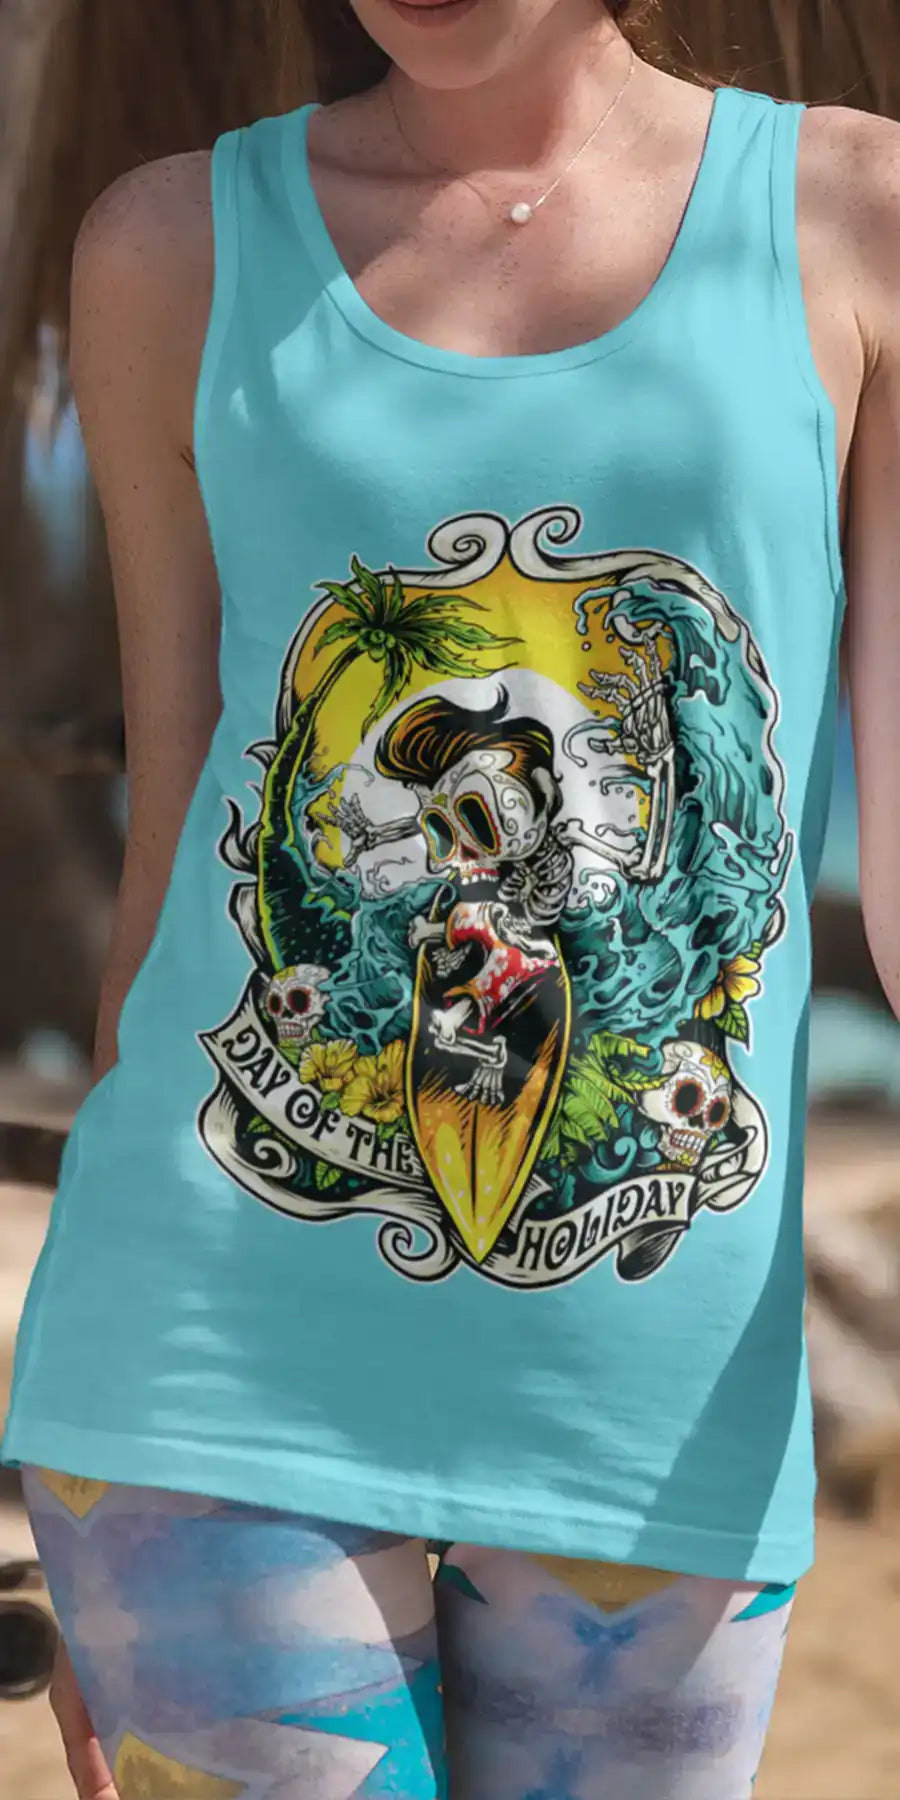 Woman is wearing a printed teal colour tank top. The tank top design is a skeleton riding a surfboard. Sea, sand and palms on the background - Mobile